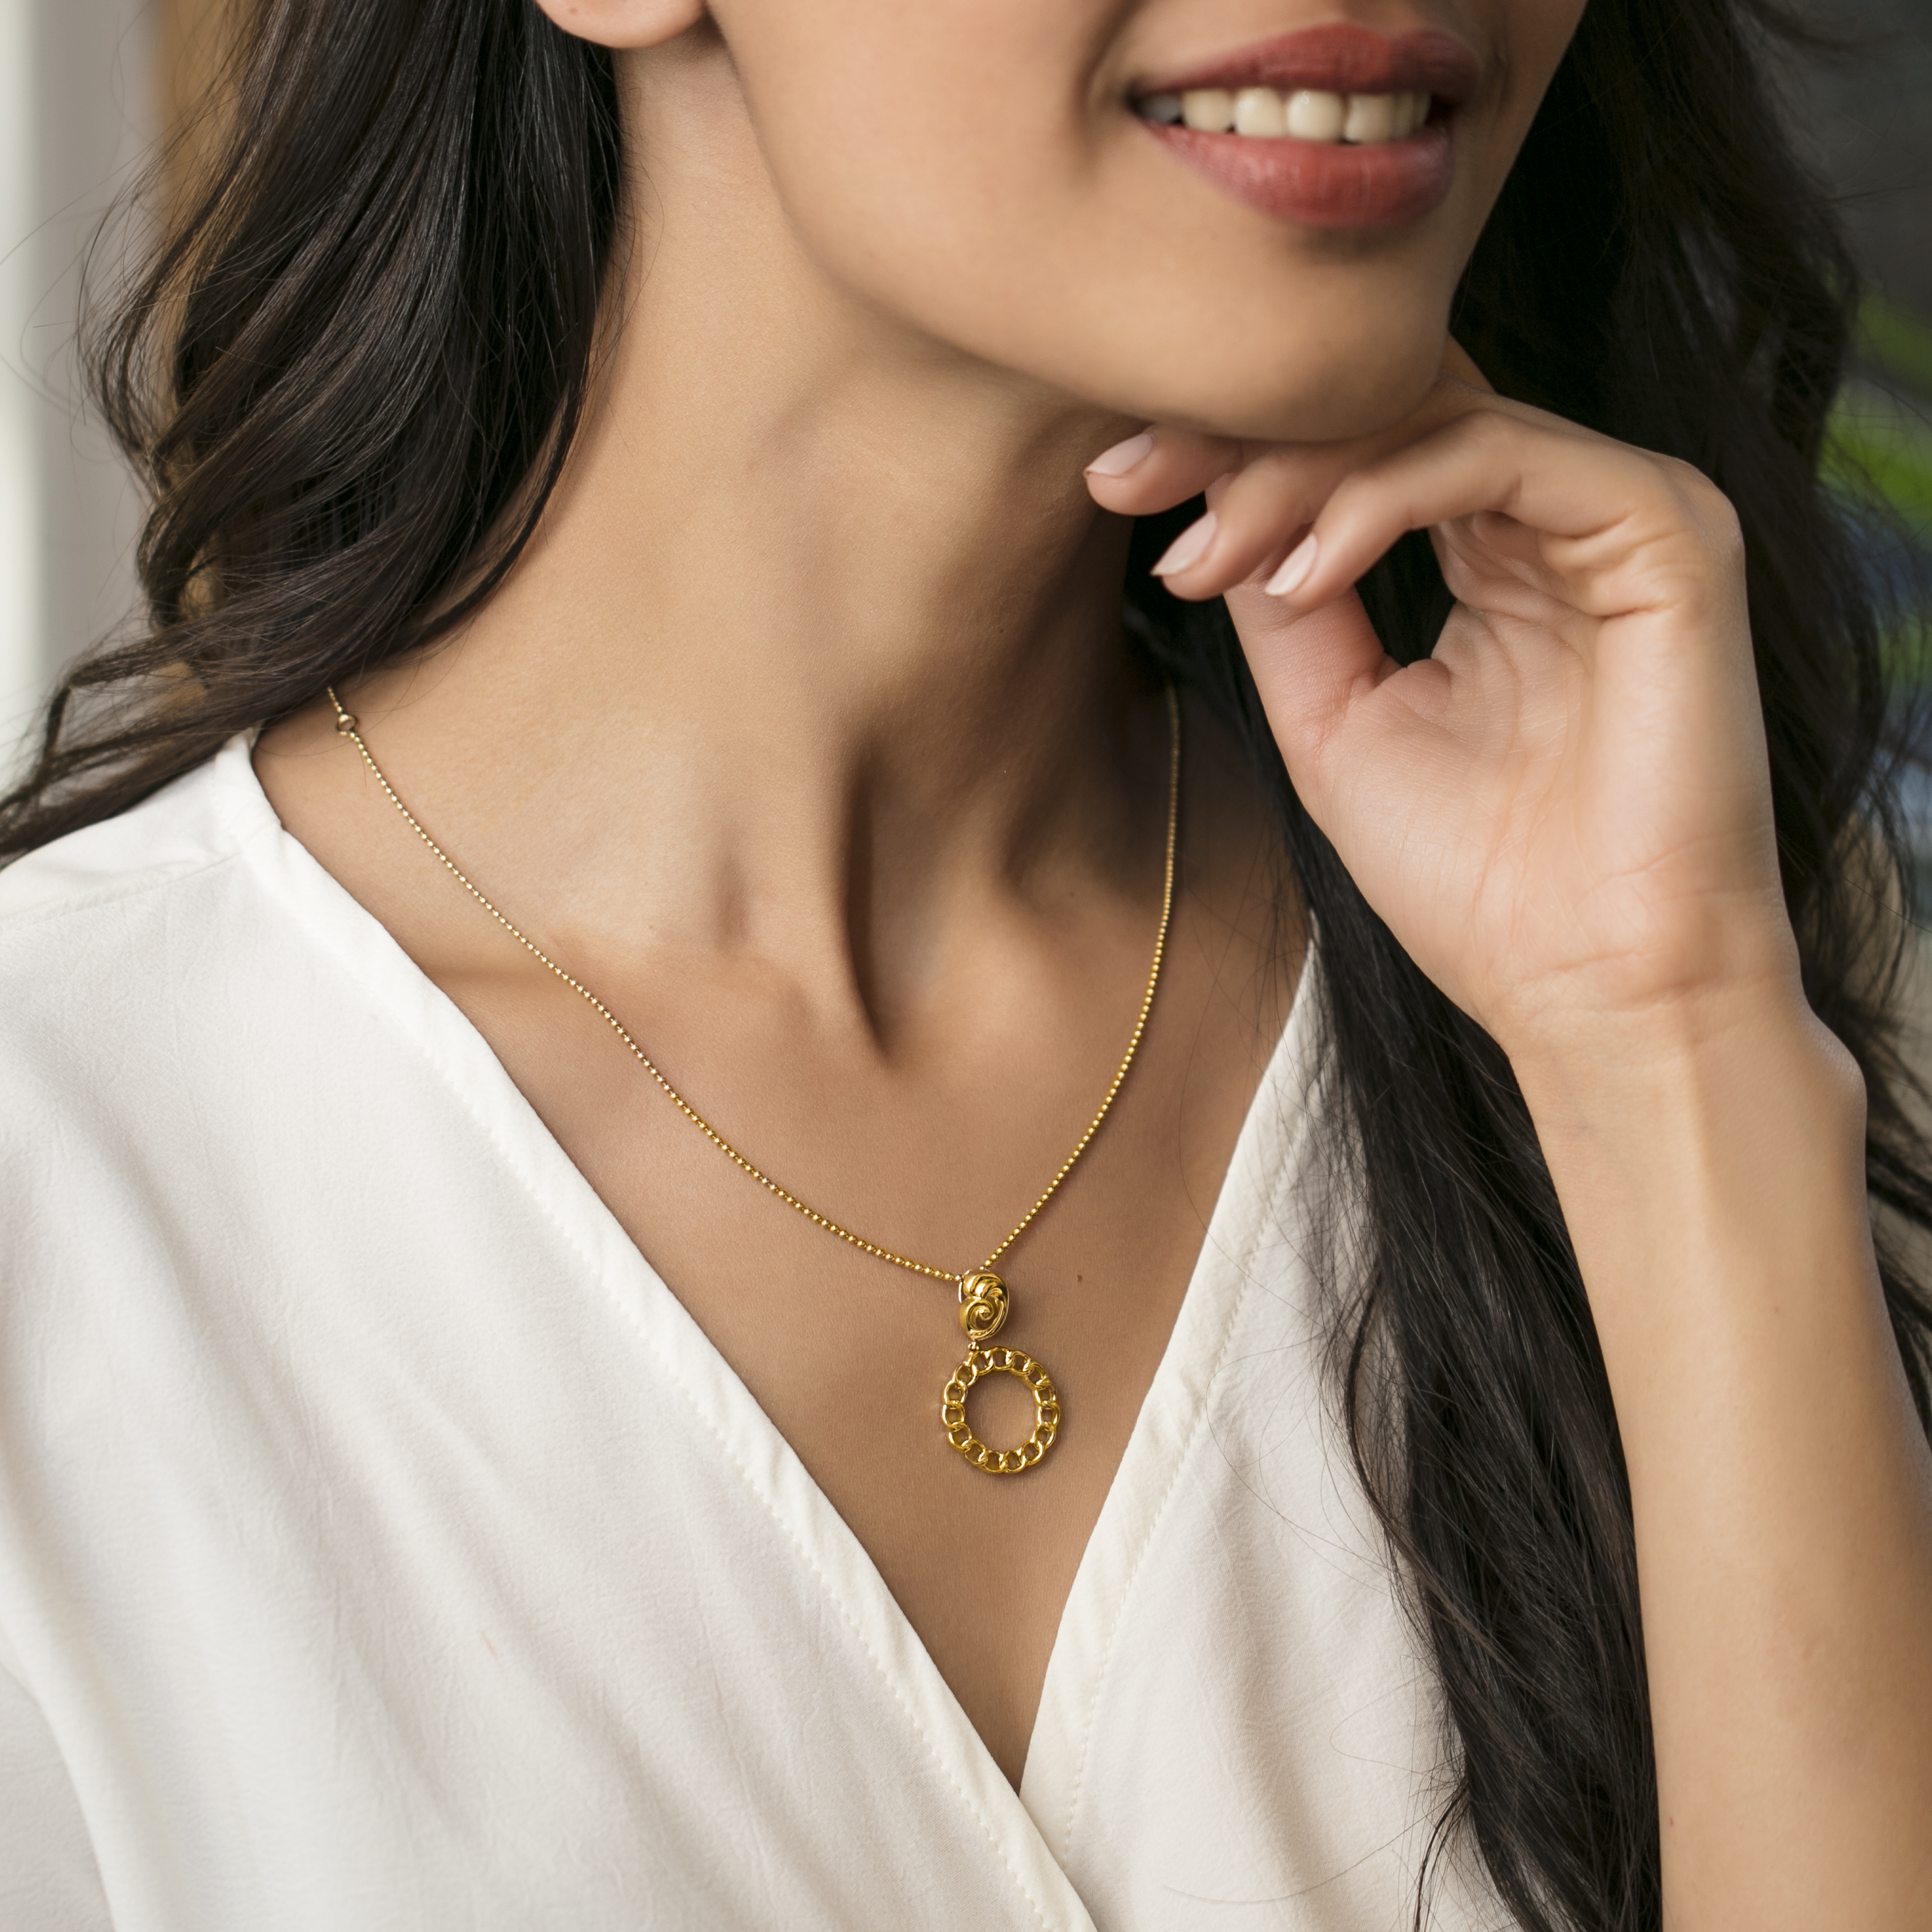 10 Gold Pendants to Pamper Yourself With! #gifting